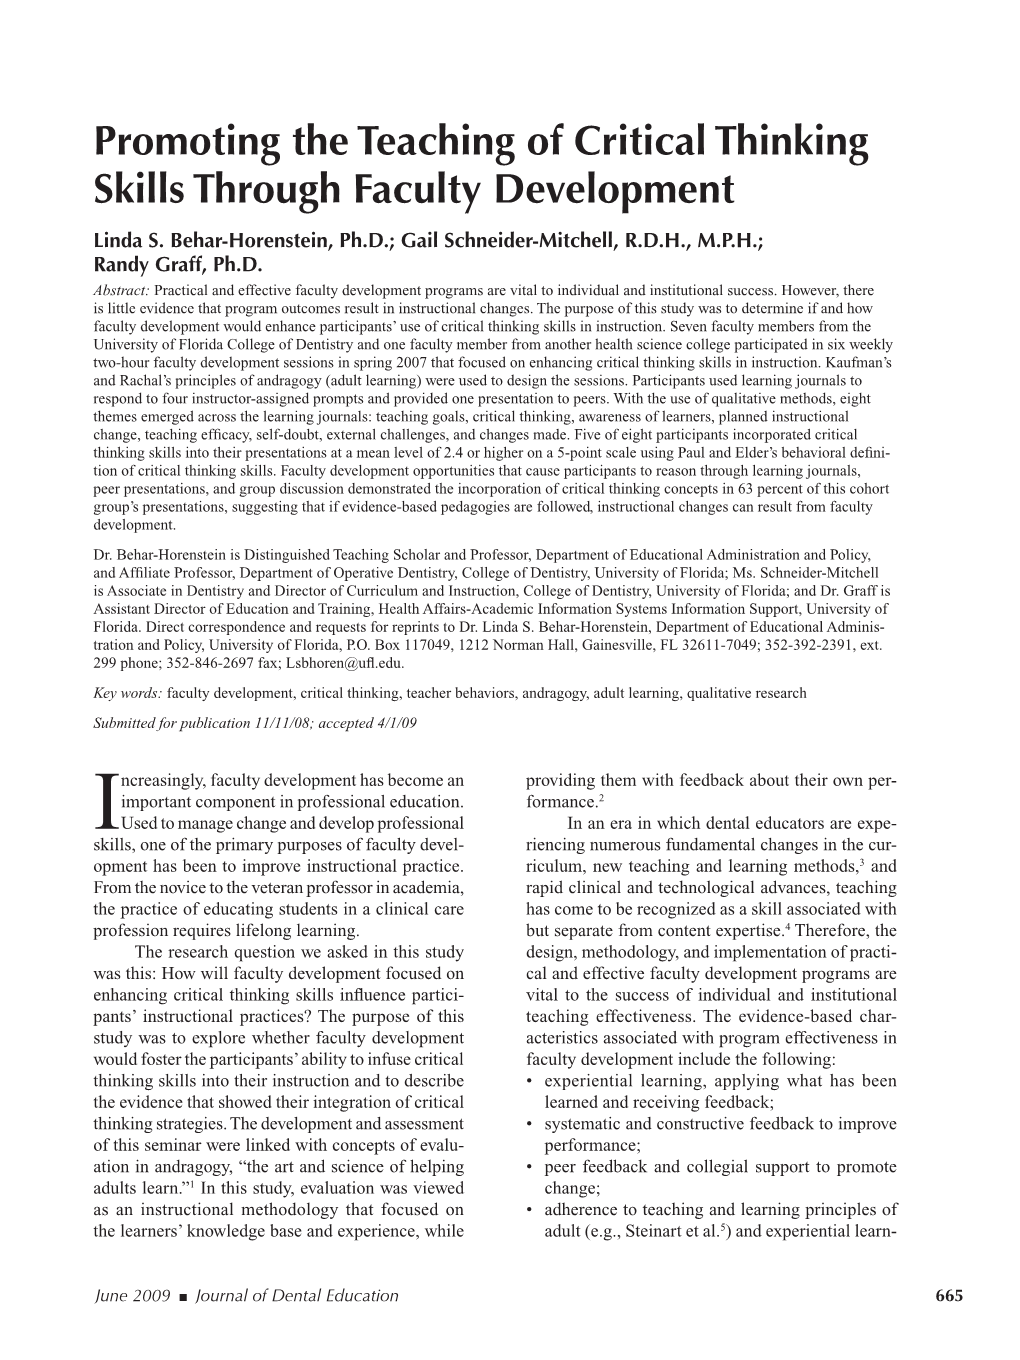 Promoting the Teaching of Critical Thinking Skills Through Faculty Development Linda S